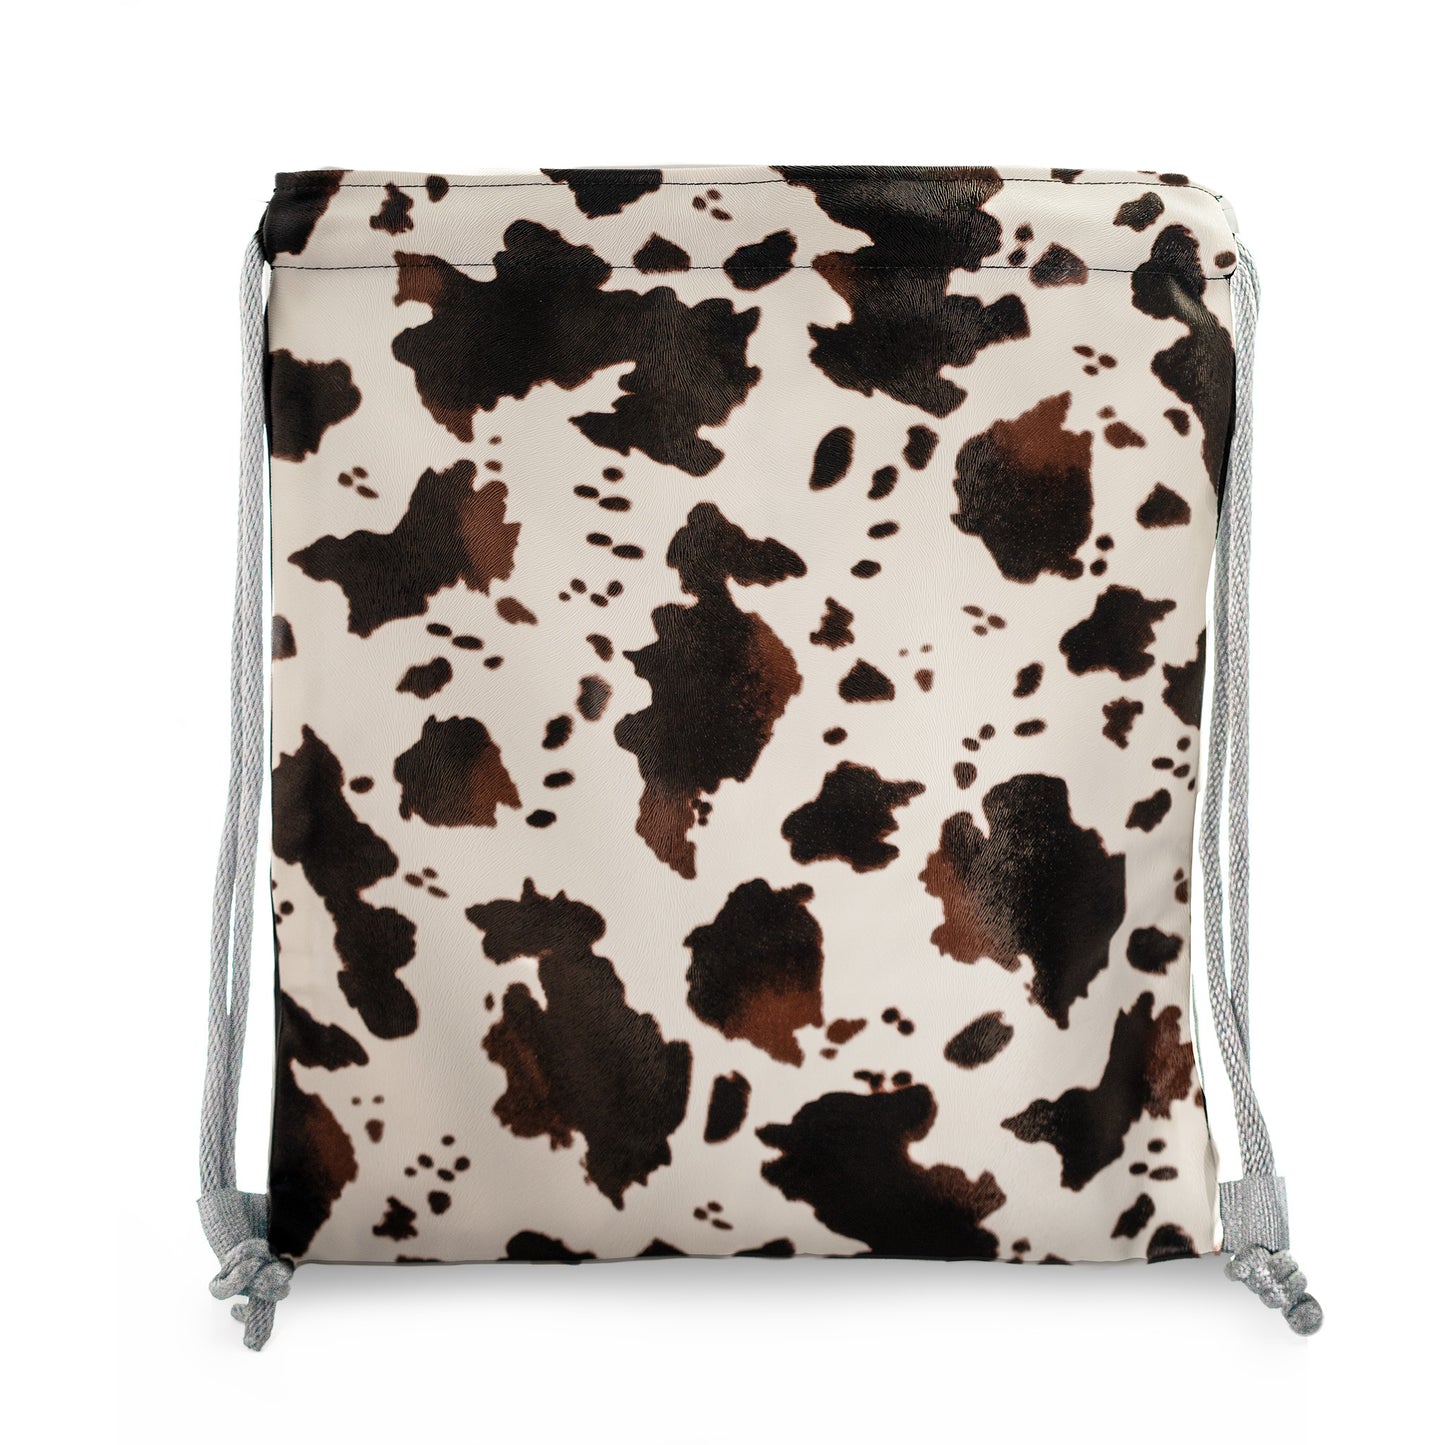 Vegan Leather Two-Tone Cow Hide Print Drawstring Backpack